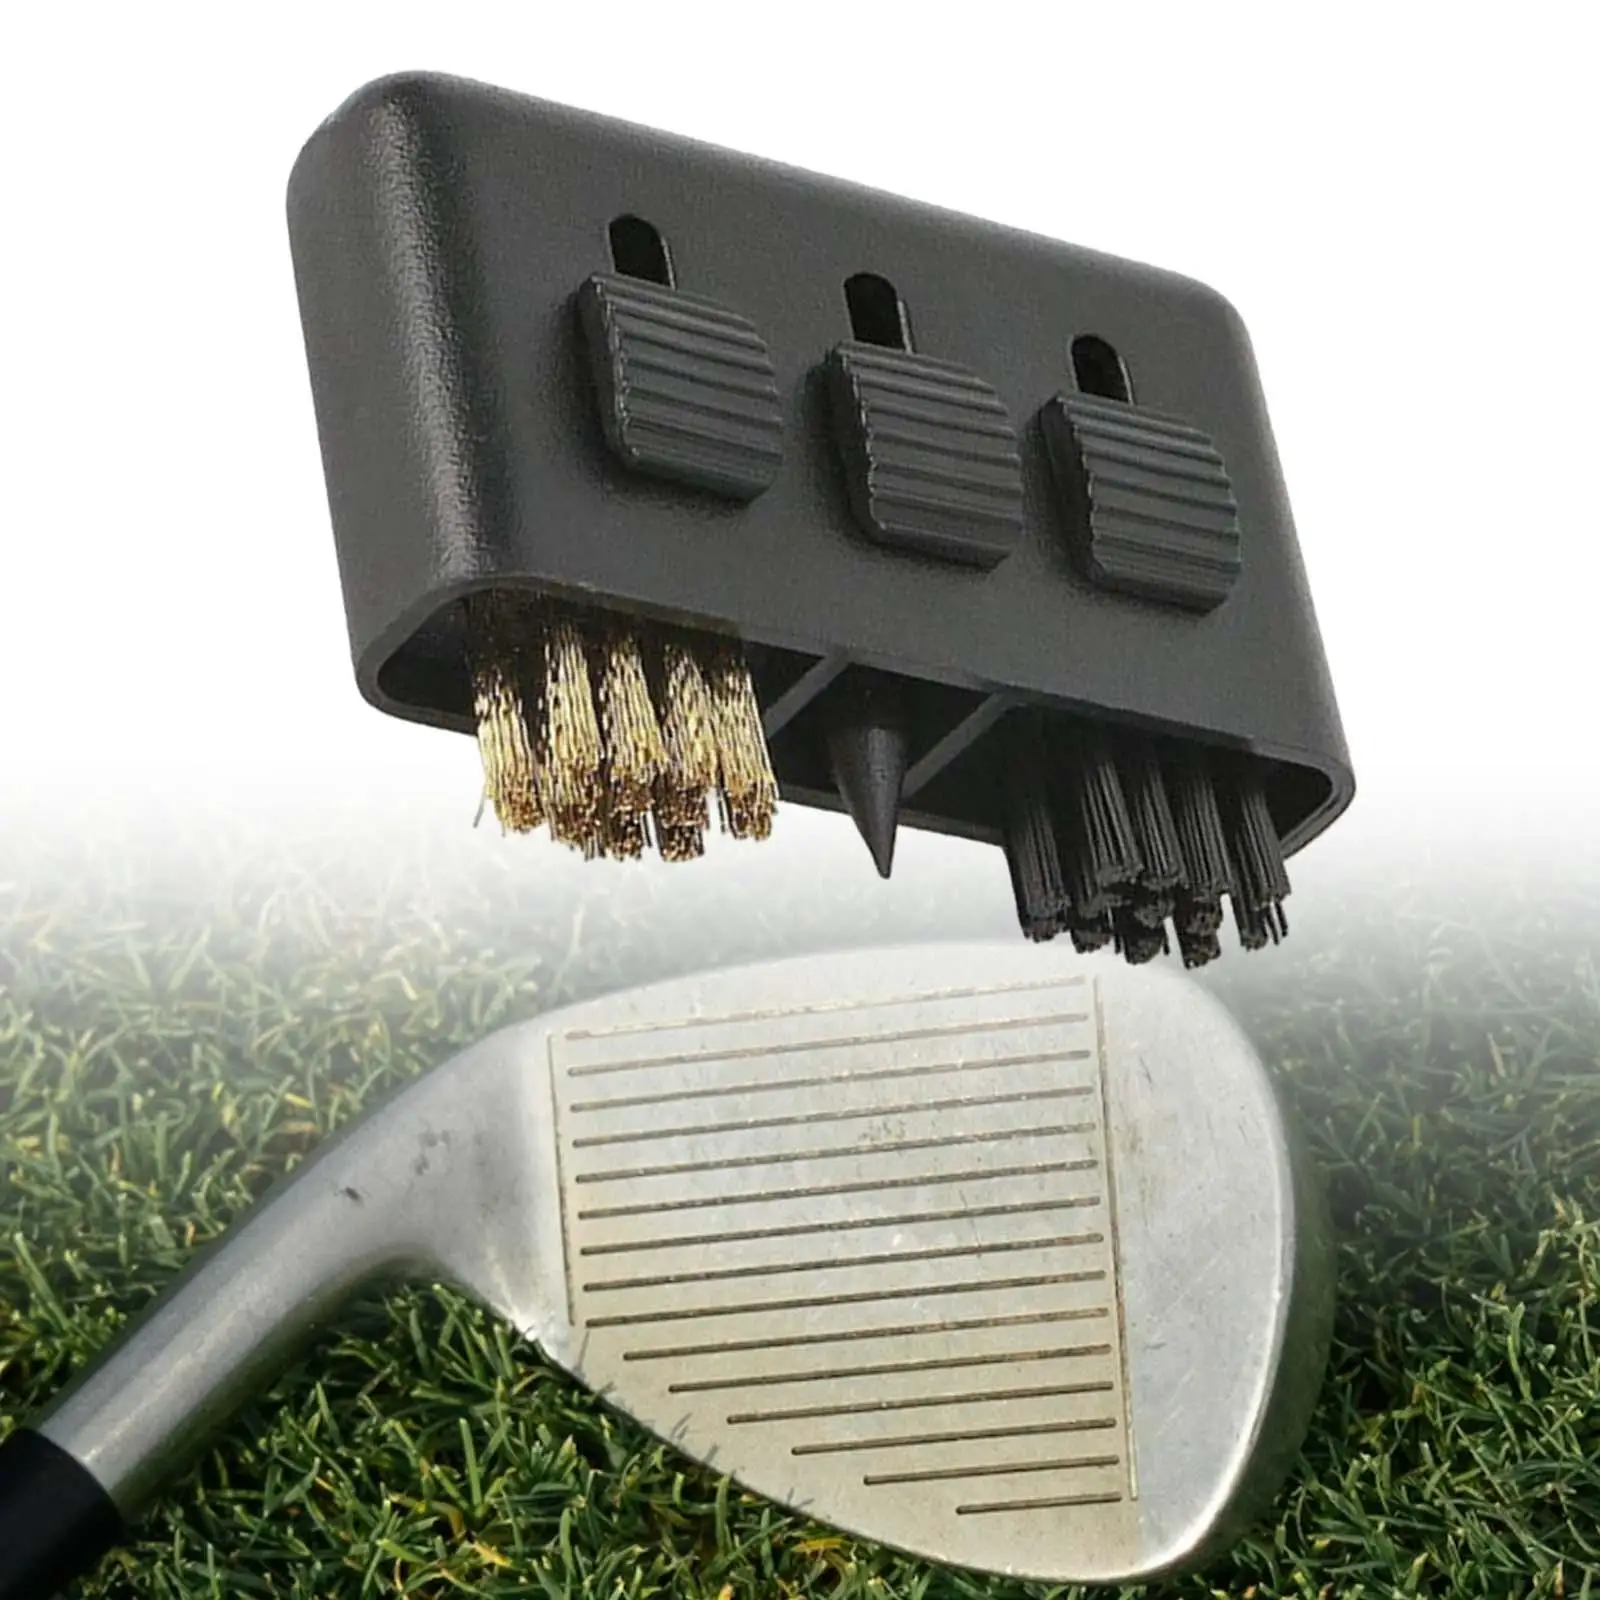 3 in 1 Golf Club Brush Retractable Restorer Cleaning Tool Golf Training Aids with Clip Groove Cleaner Tool Portable for Golfer